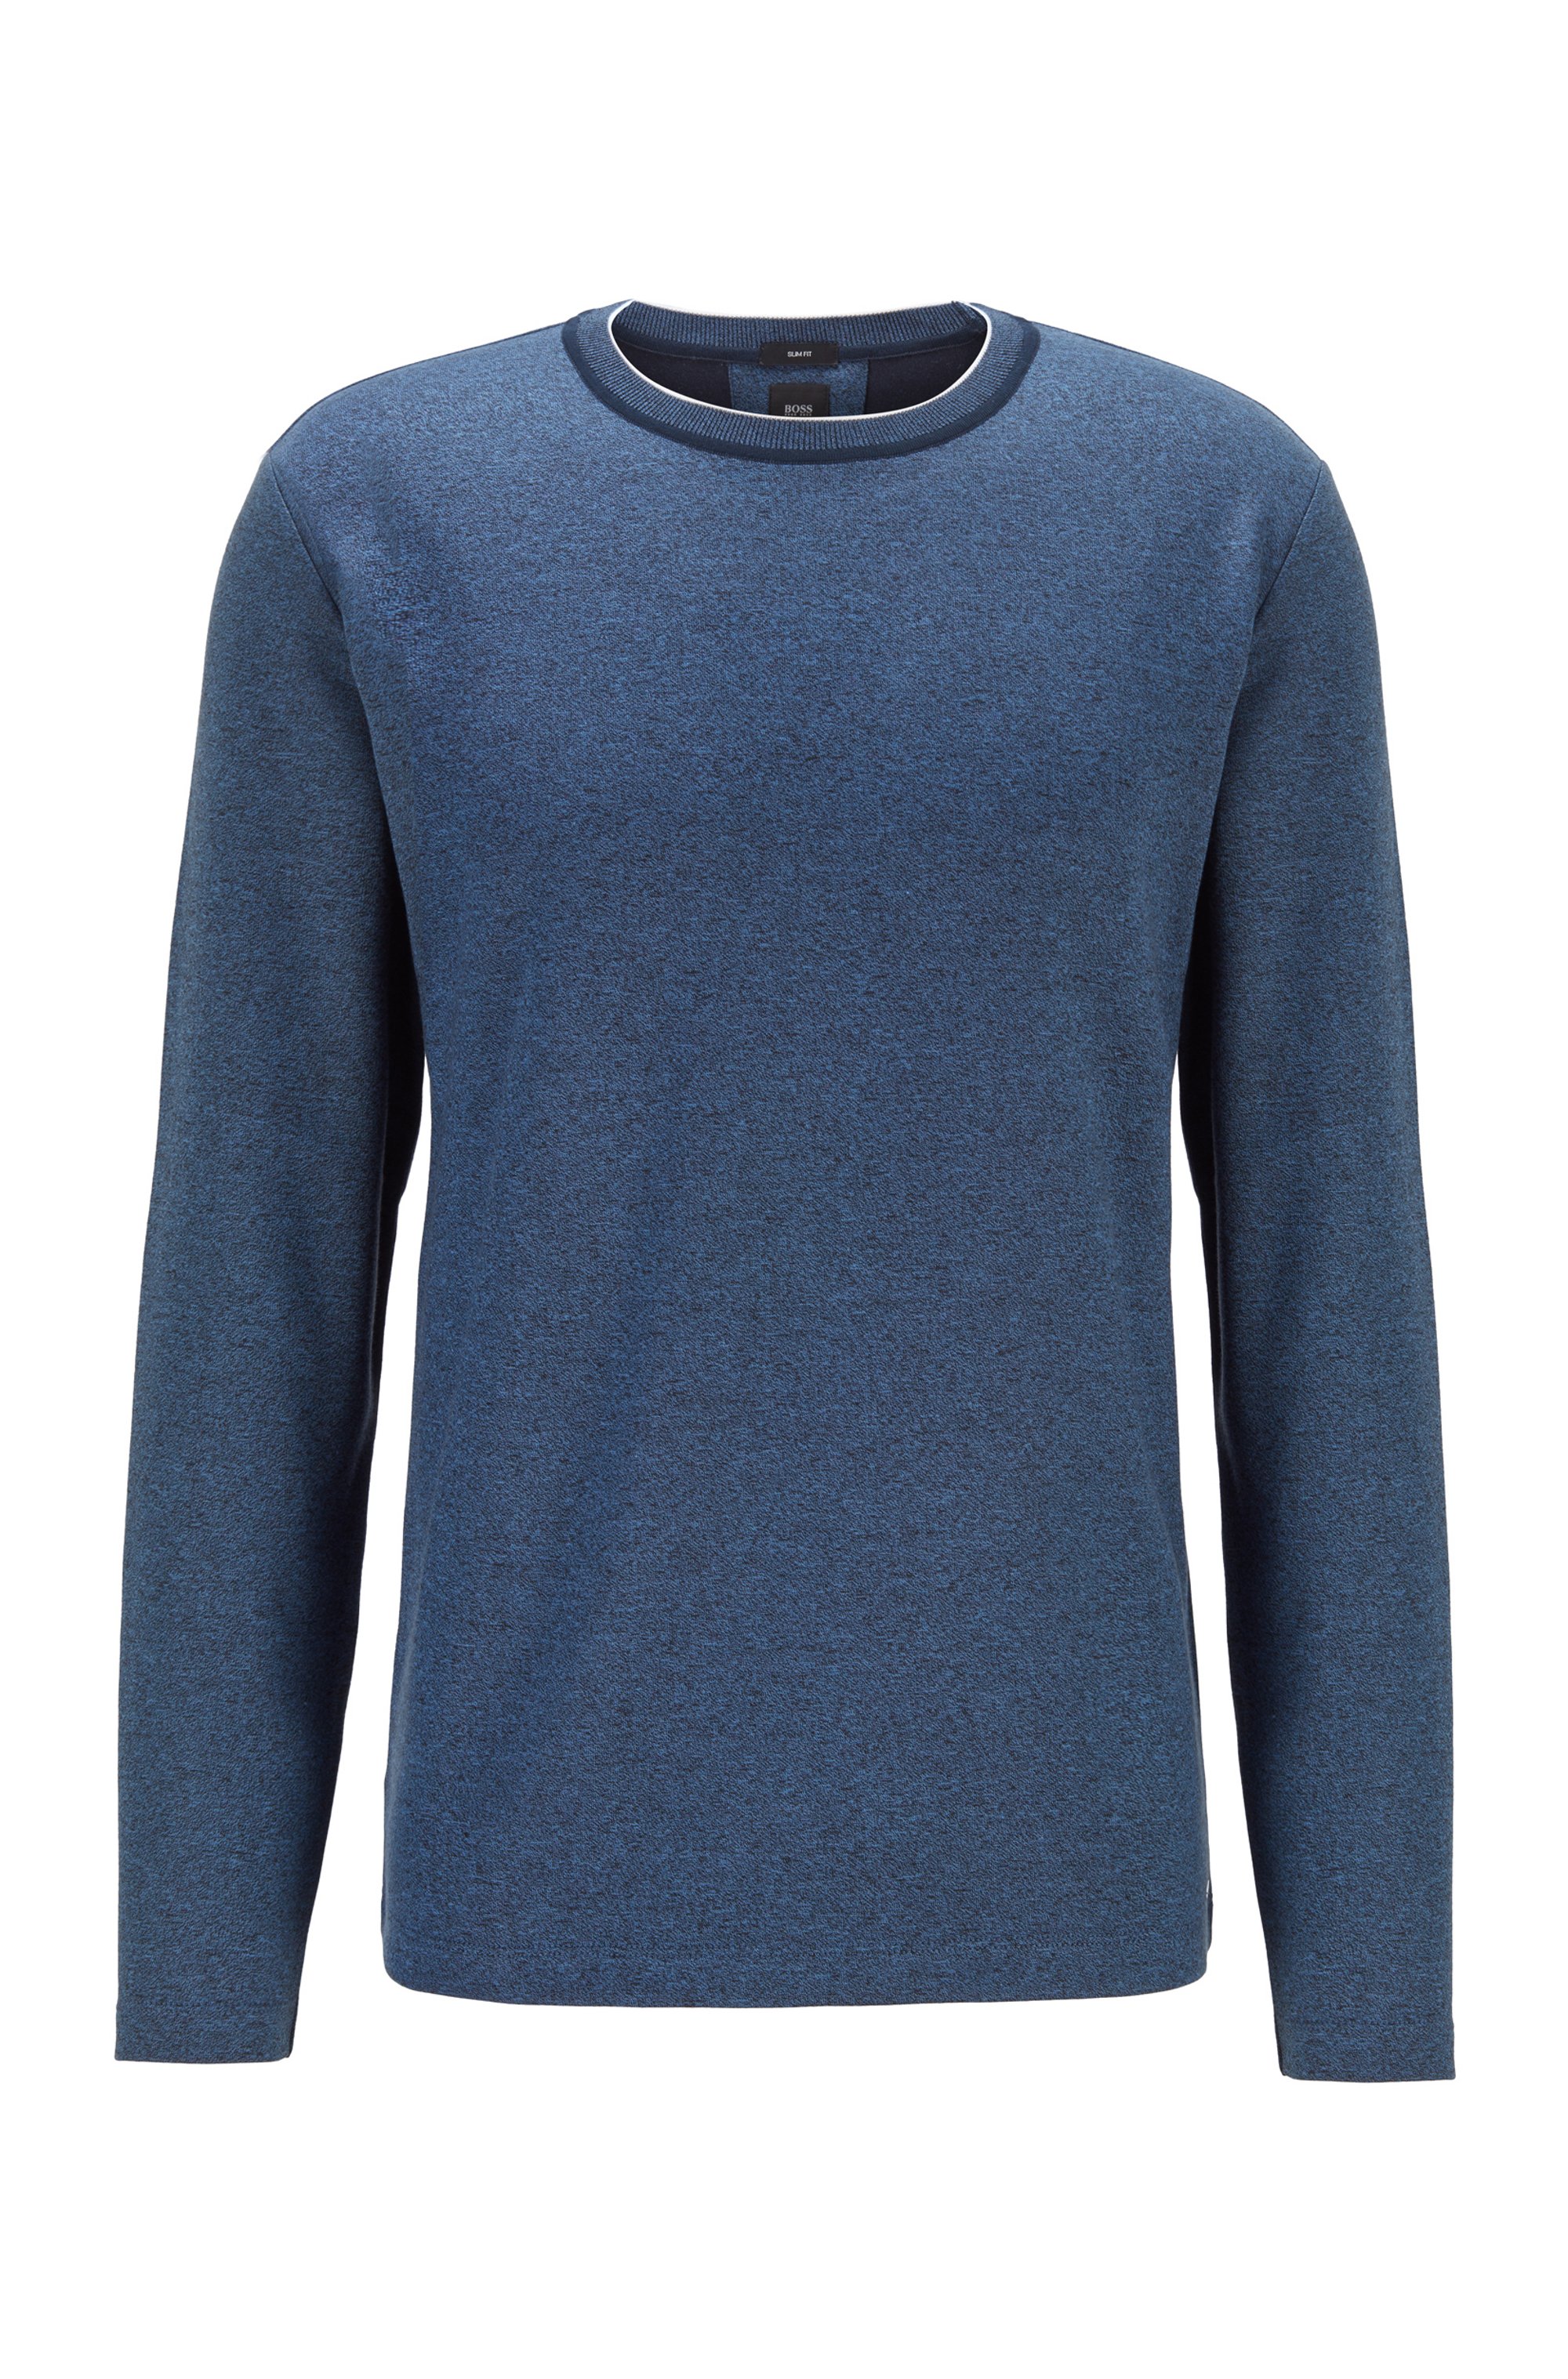 Slim-fit T-shirt in mouliné cotton with long sleeves, Dark Blue